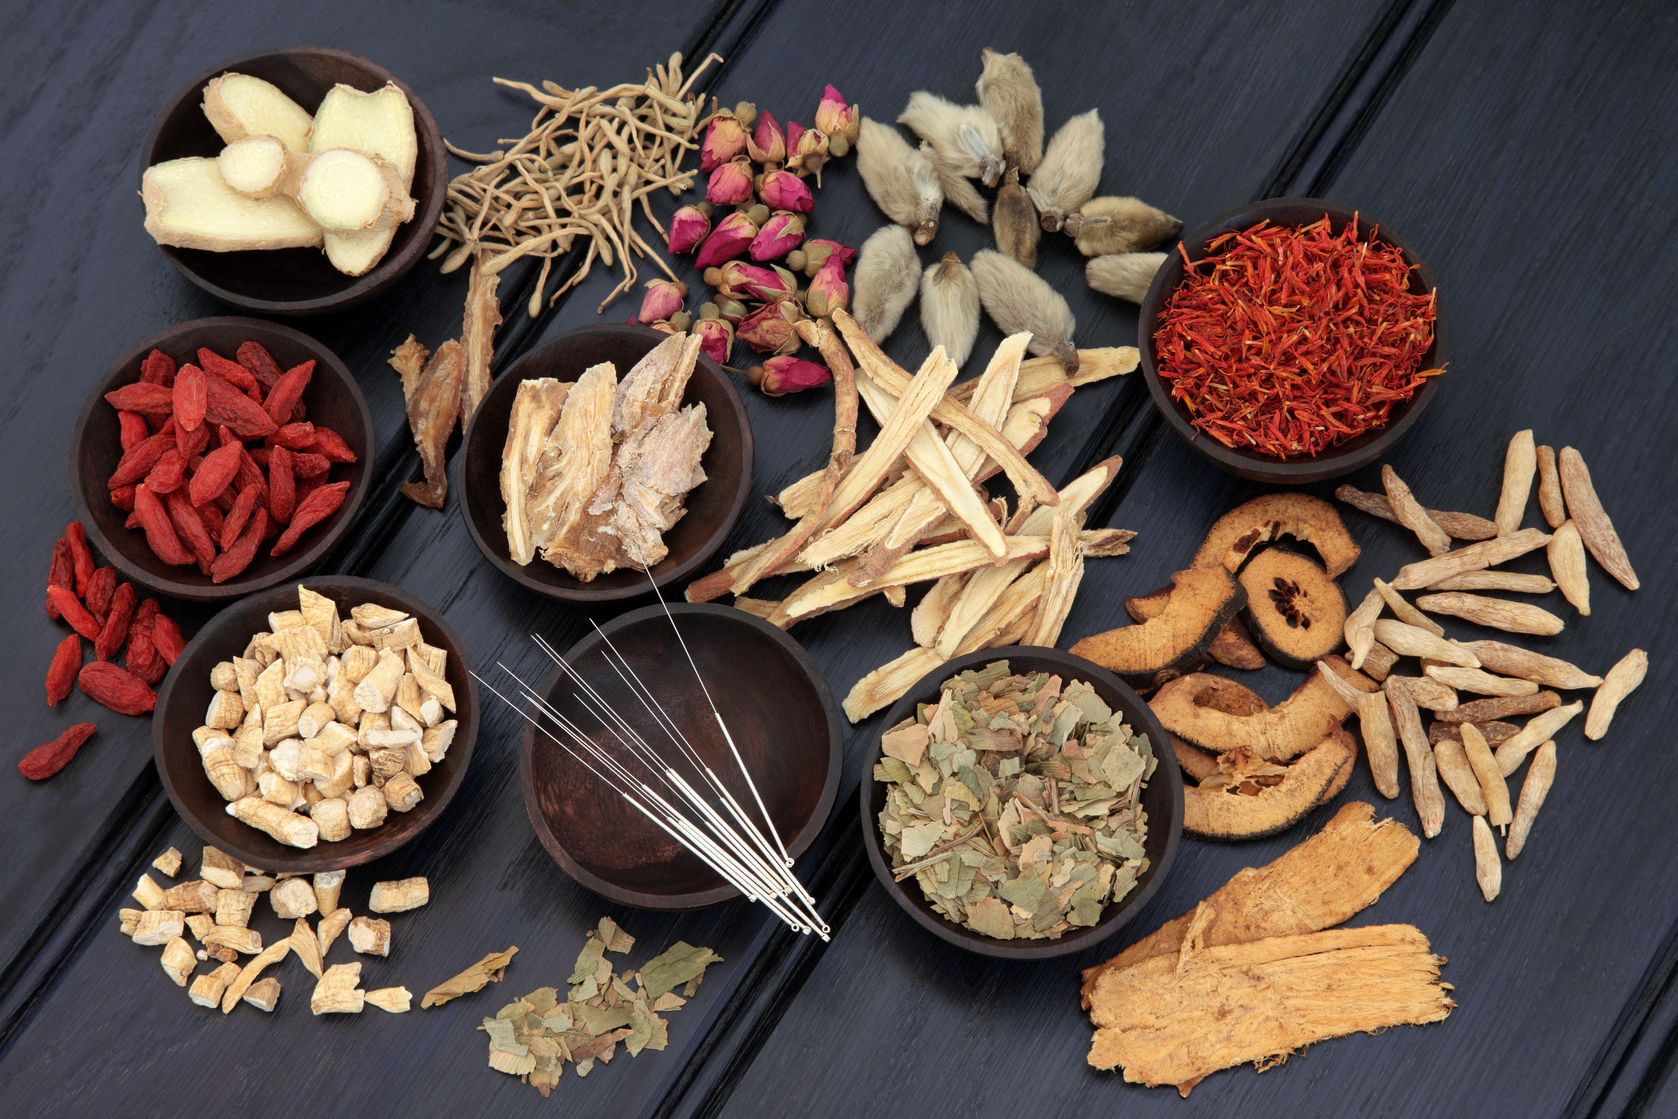 Assortment of raw Chinese medicine herbs and a tray of filiform acupuncture needles.